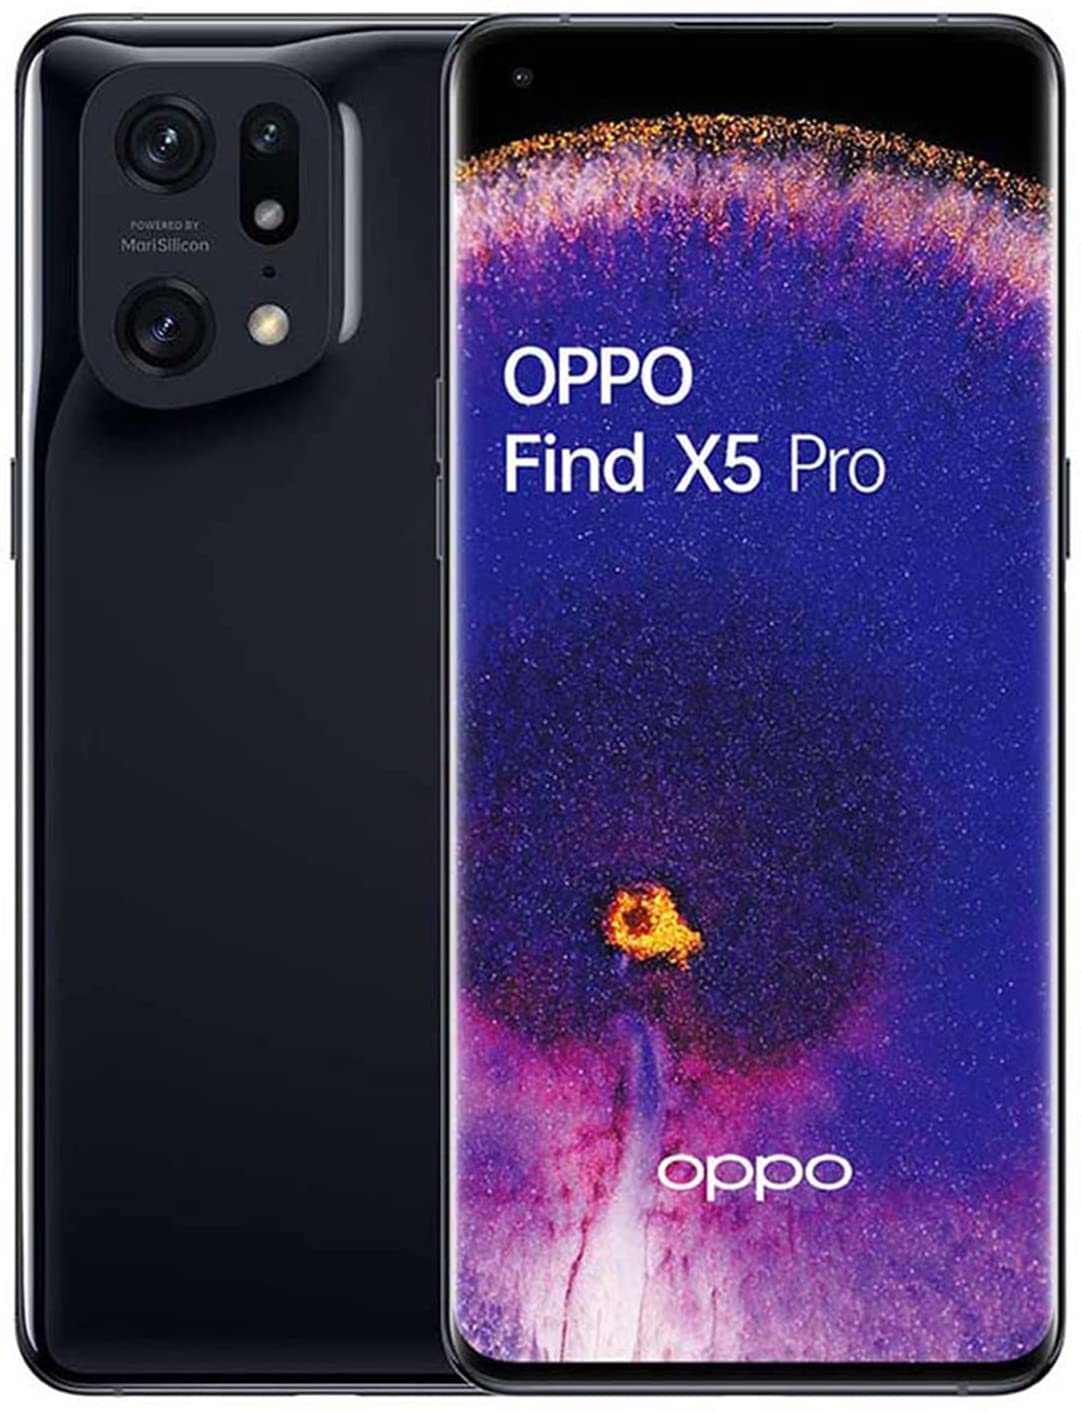 ᐅ refurbed™ Oppo Find X5 Pro 5G from €1،070 | Now with a 30 Day Trial Period